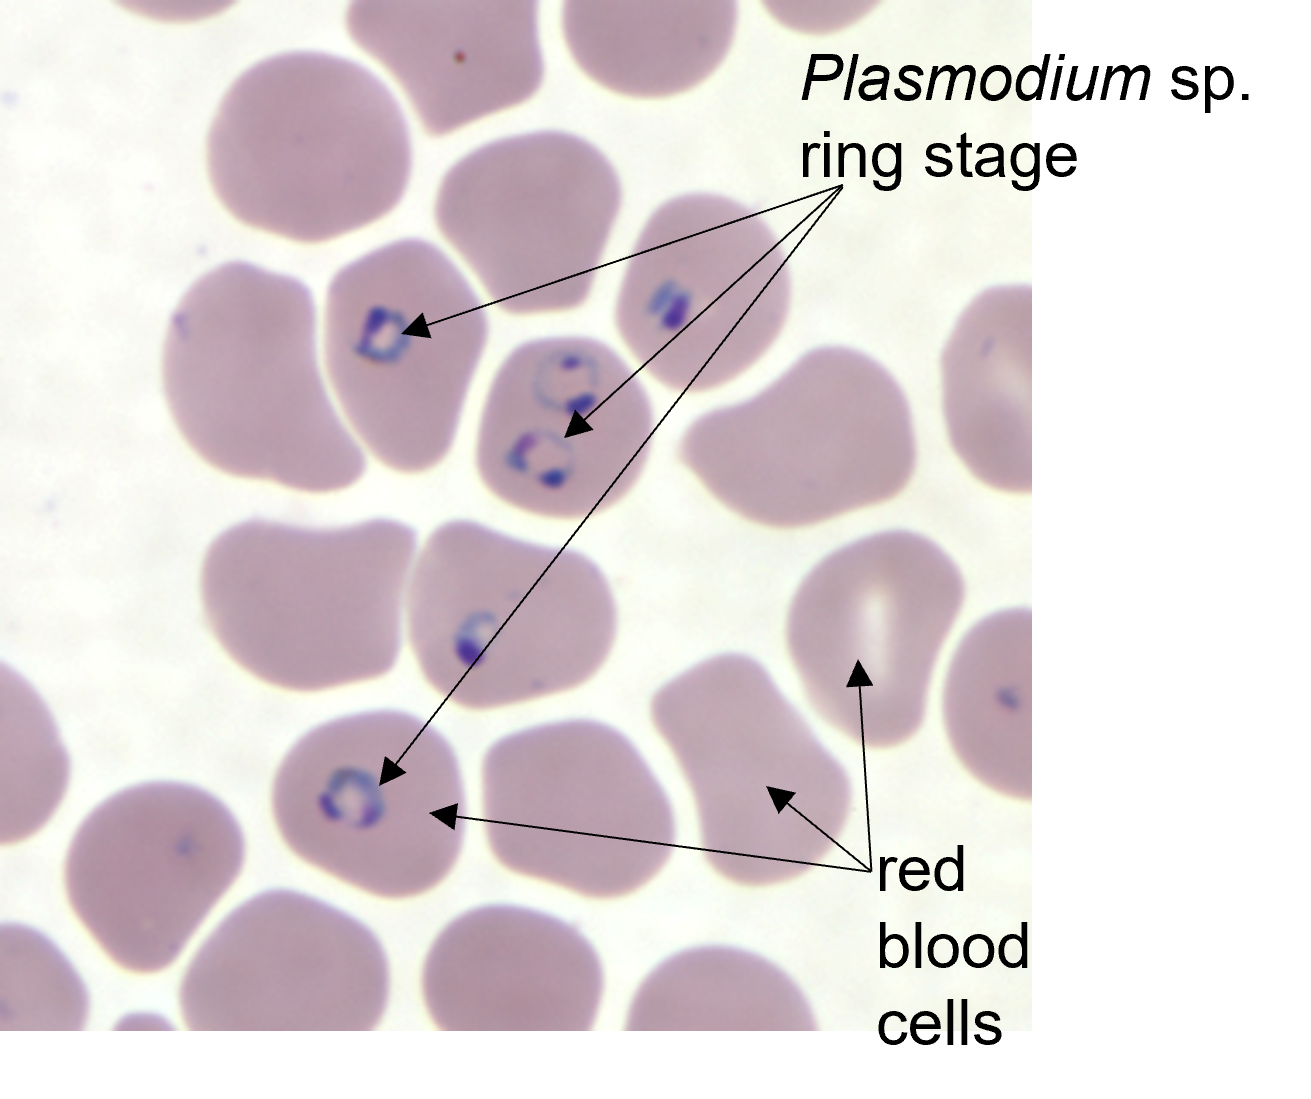 Plasmodium Vivax Inside Red Blood Cell in the Stage of Ring-form  Trophozoite Stock Illustration - Illustration of erythrocyte, fever:  160233950